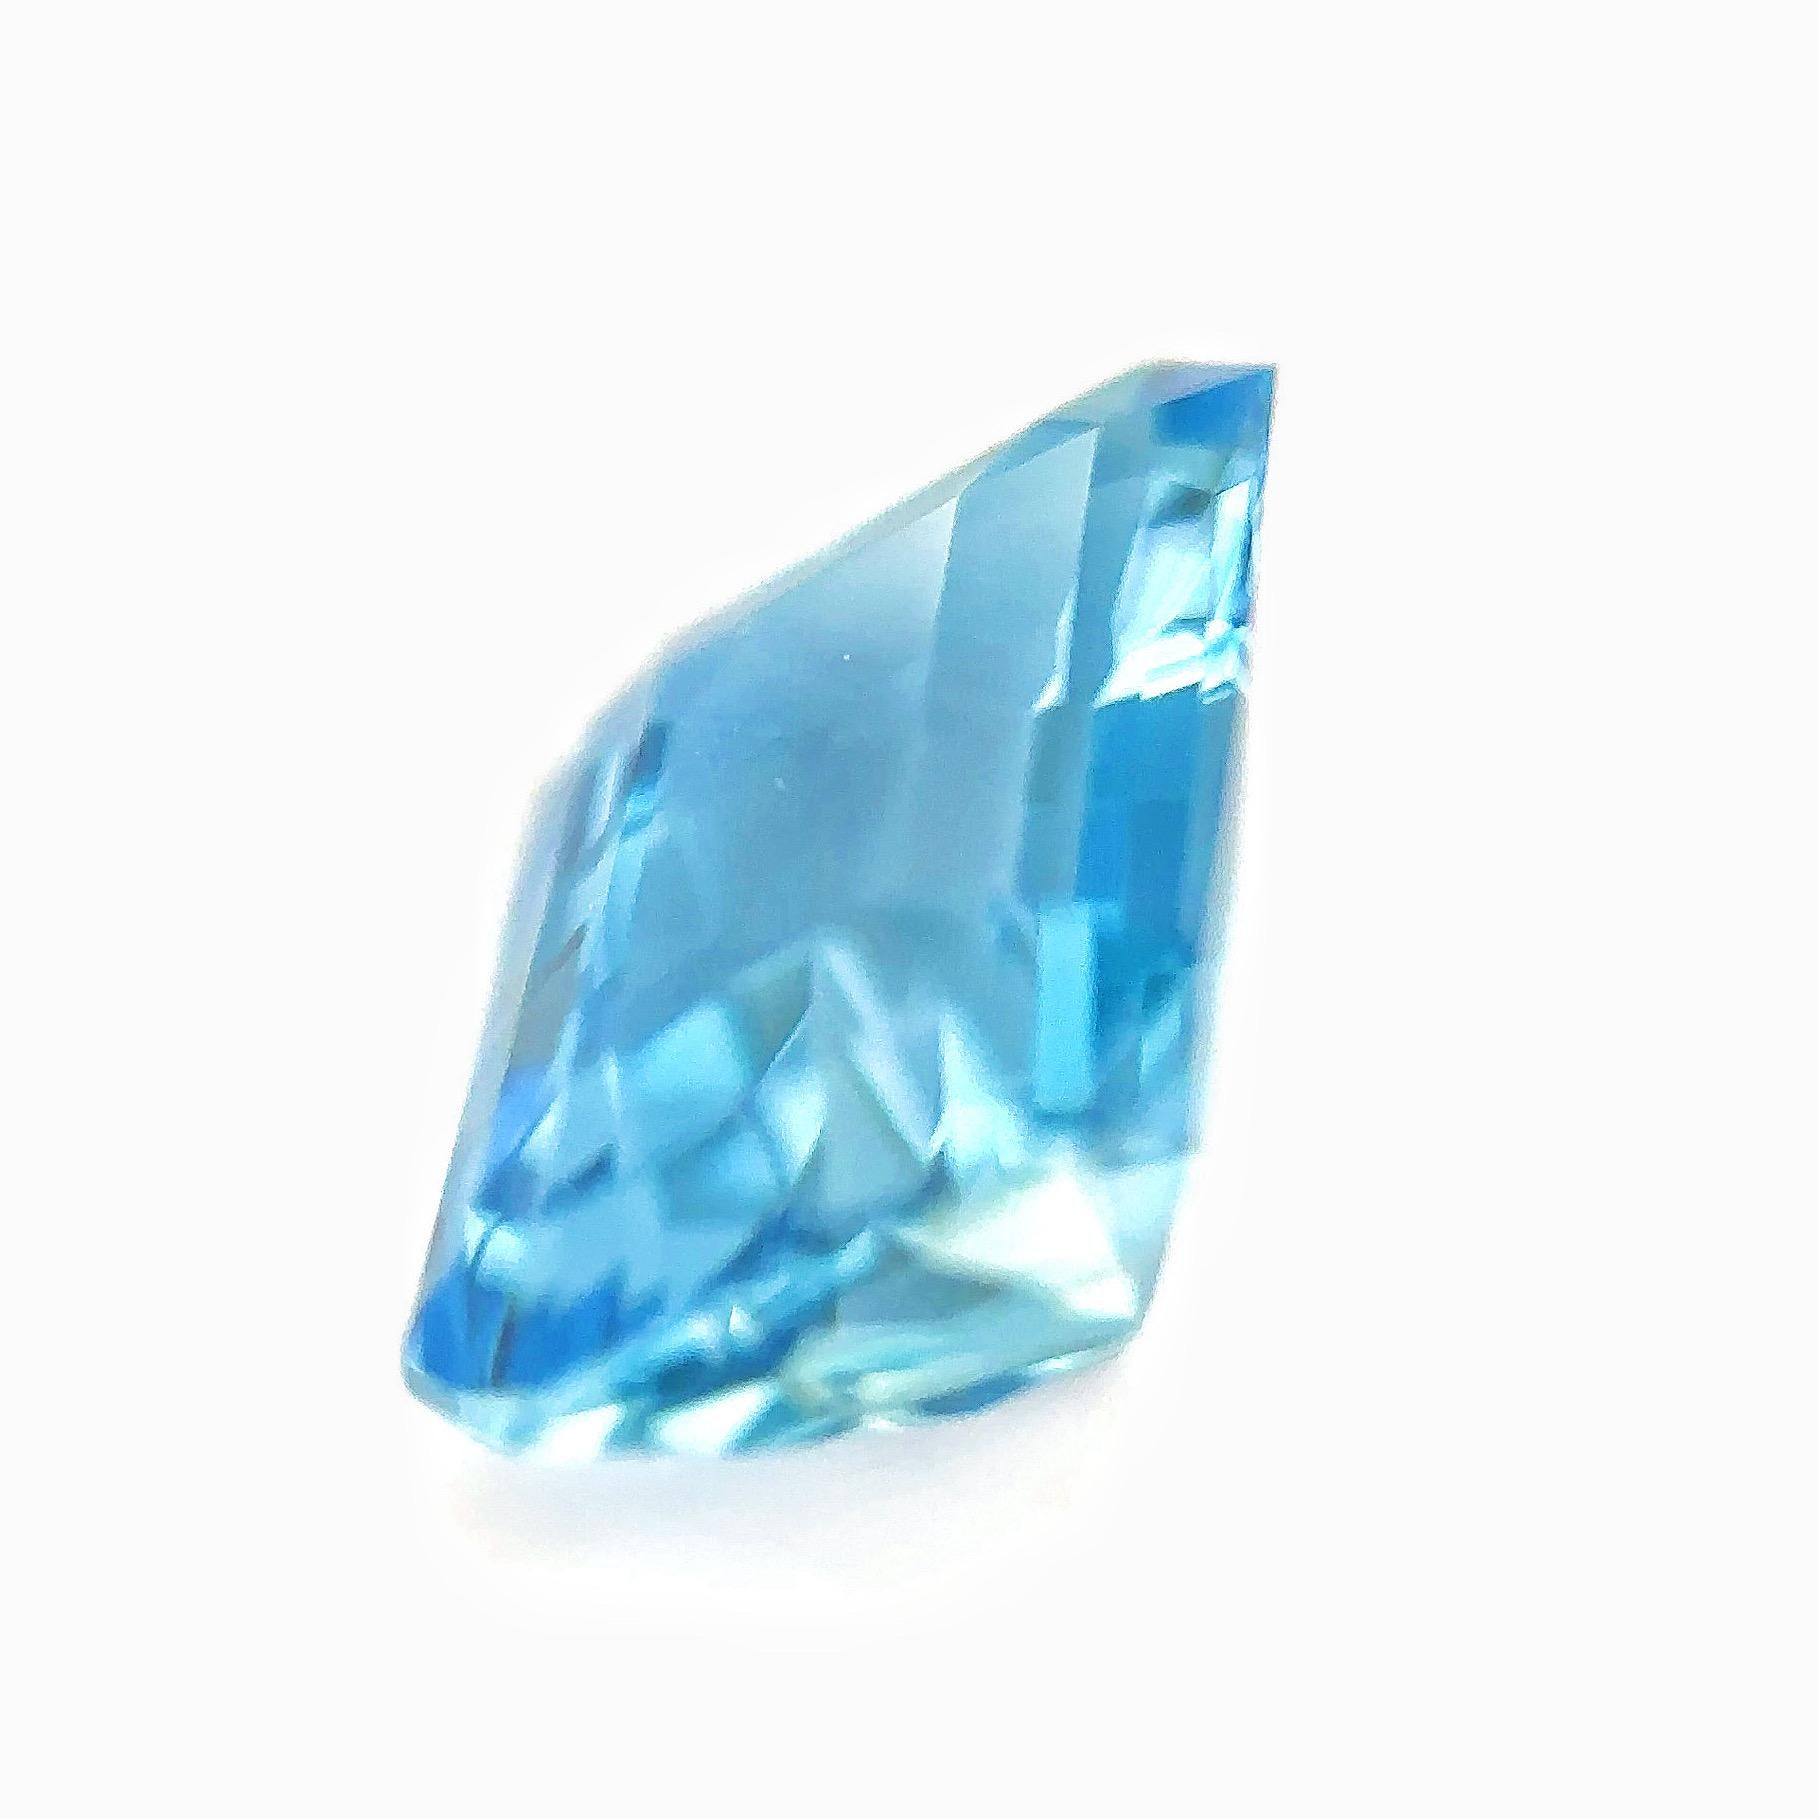 1.85 Carat Natural Santa Maria Color Aquamarine Loose Stone

Appointed lab certificate can be arranged upon request

This Item is ideal for your design as an engagement ring, cocktail ring, necklace, bracelet, etc.


ABOUT US

Xuelai Jewellery